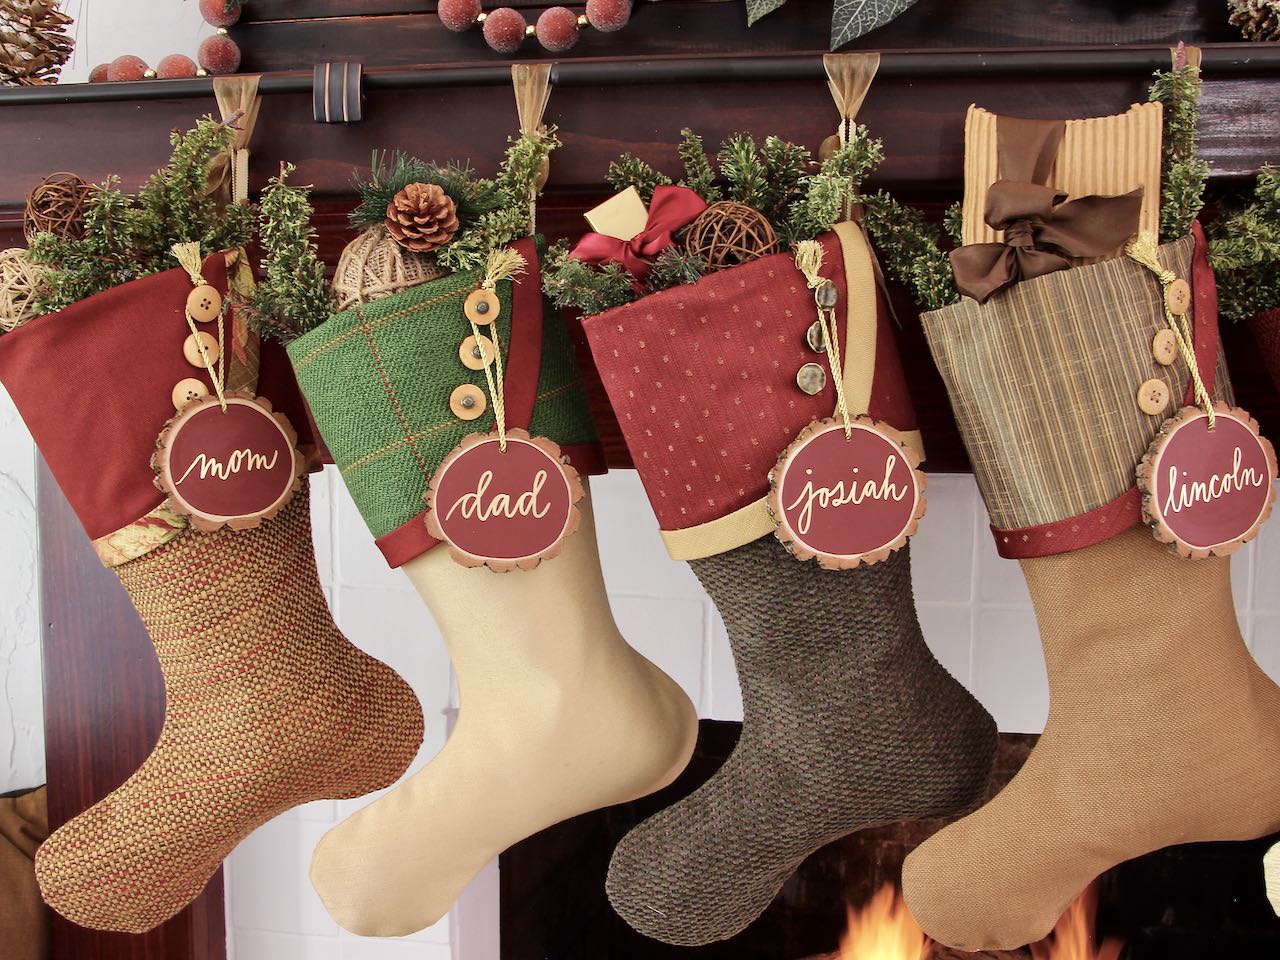 4 unique Christmas stockings hanging from dark wood mantel